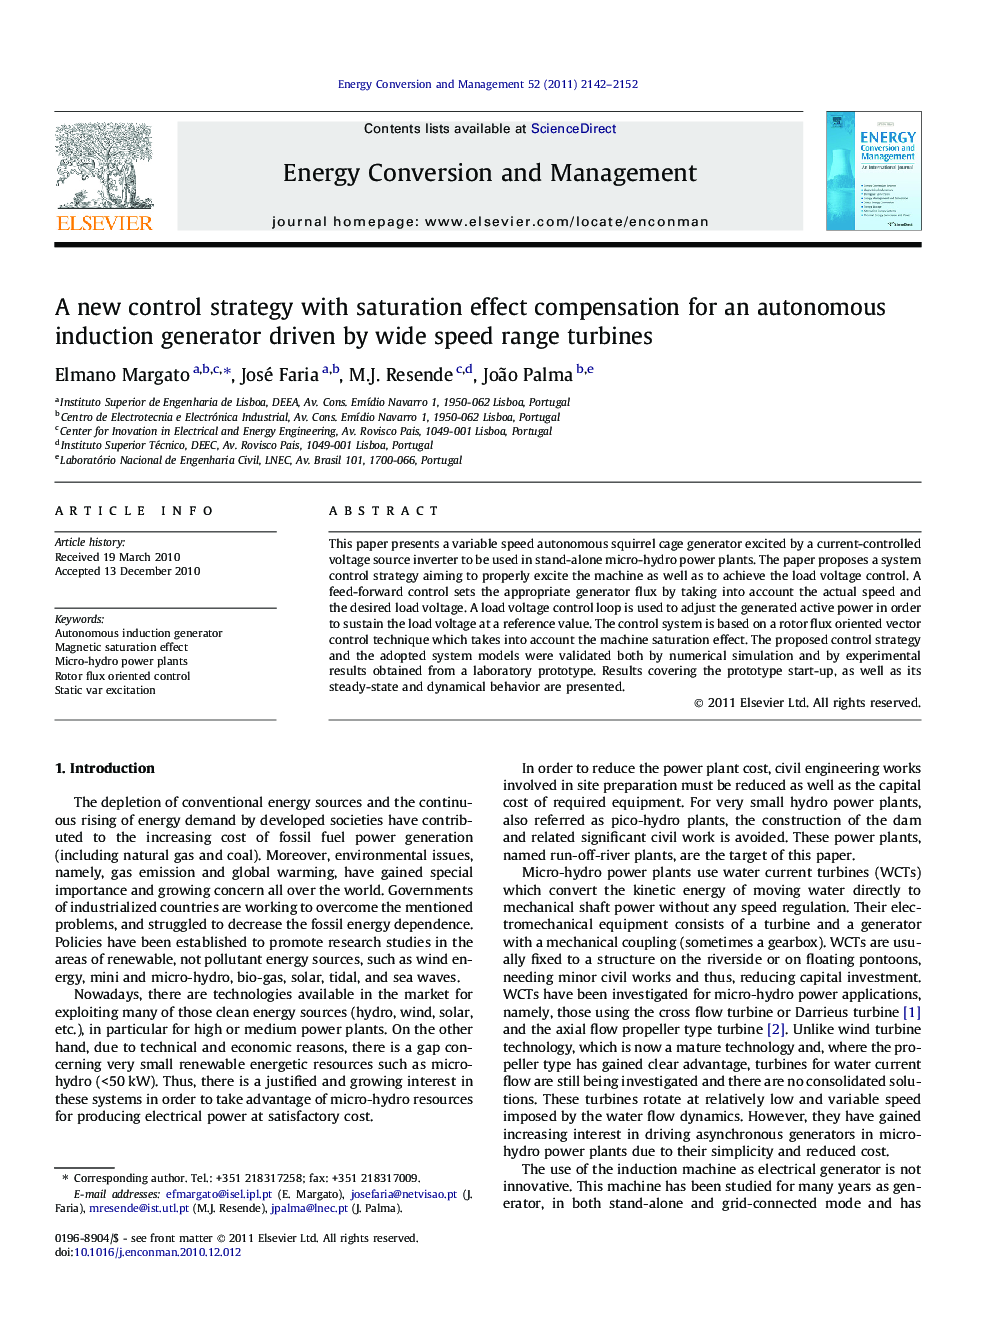 A new control strategy with saturation effect compensation for an autonomous induction generator driven by wide speed range turbines